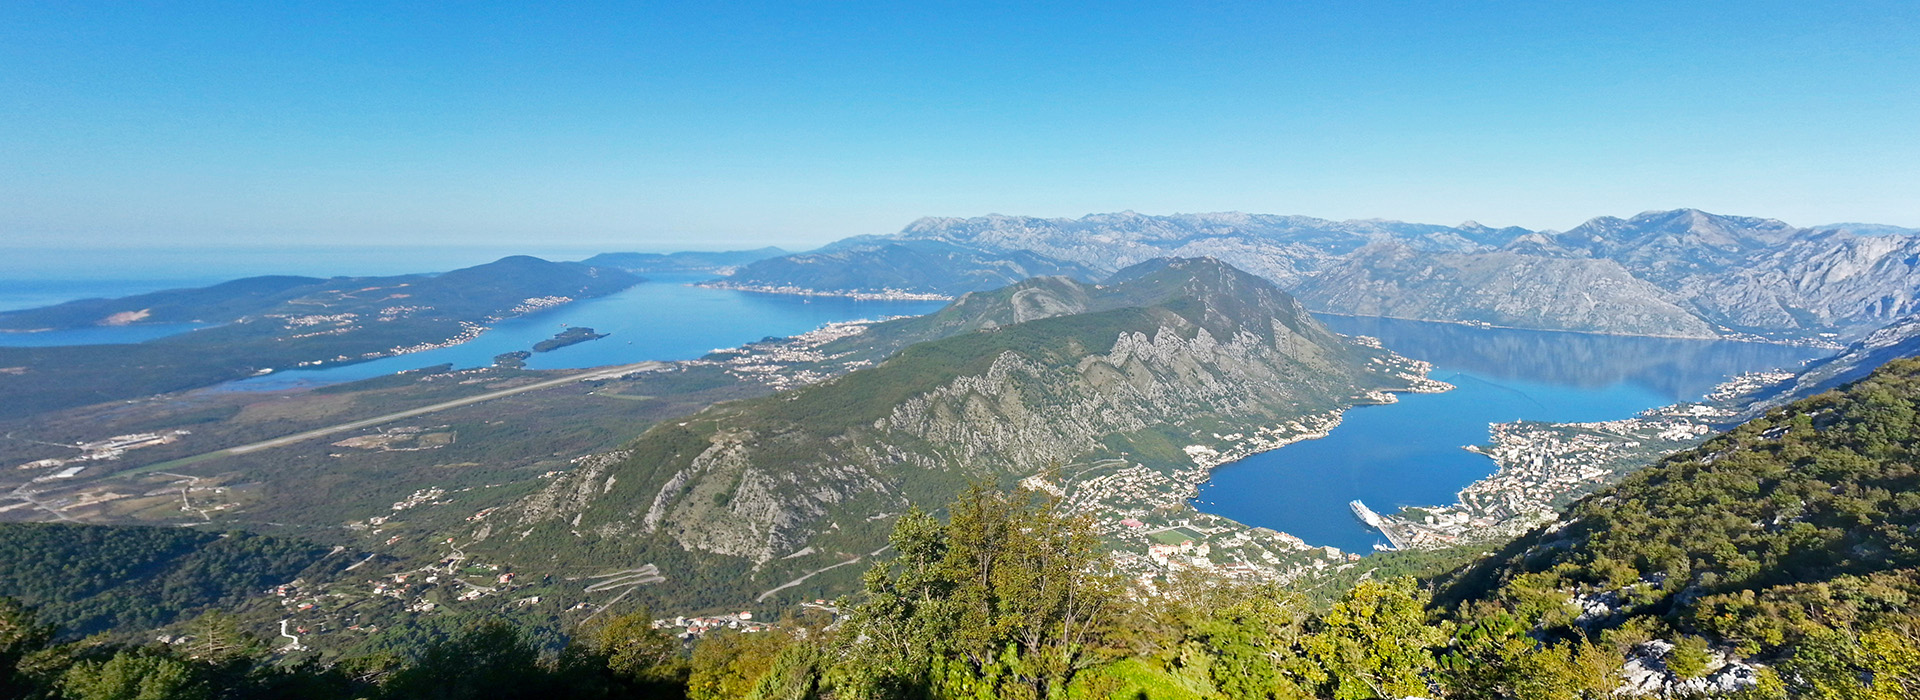 Luxury Family Holiday in Montenegro - Bay of Kotor